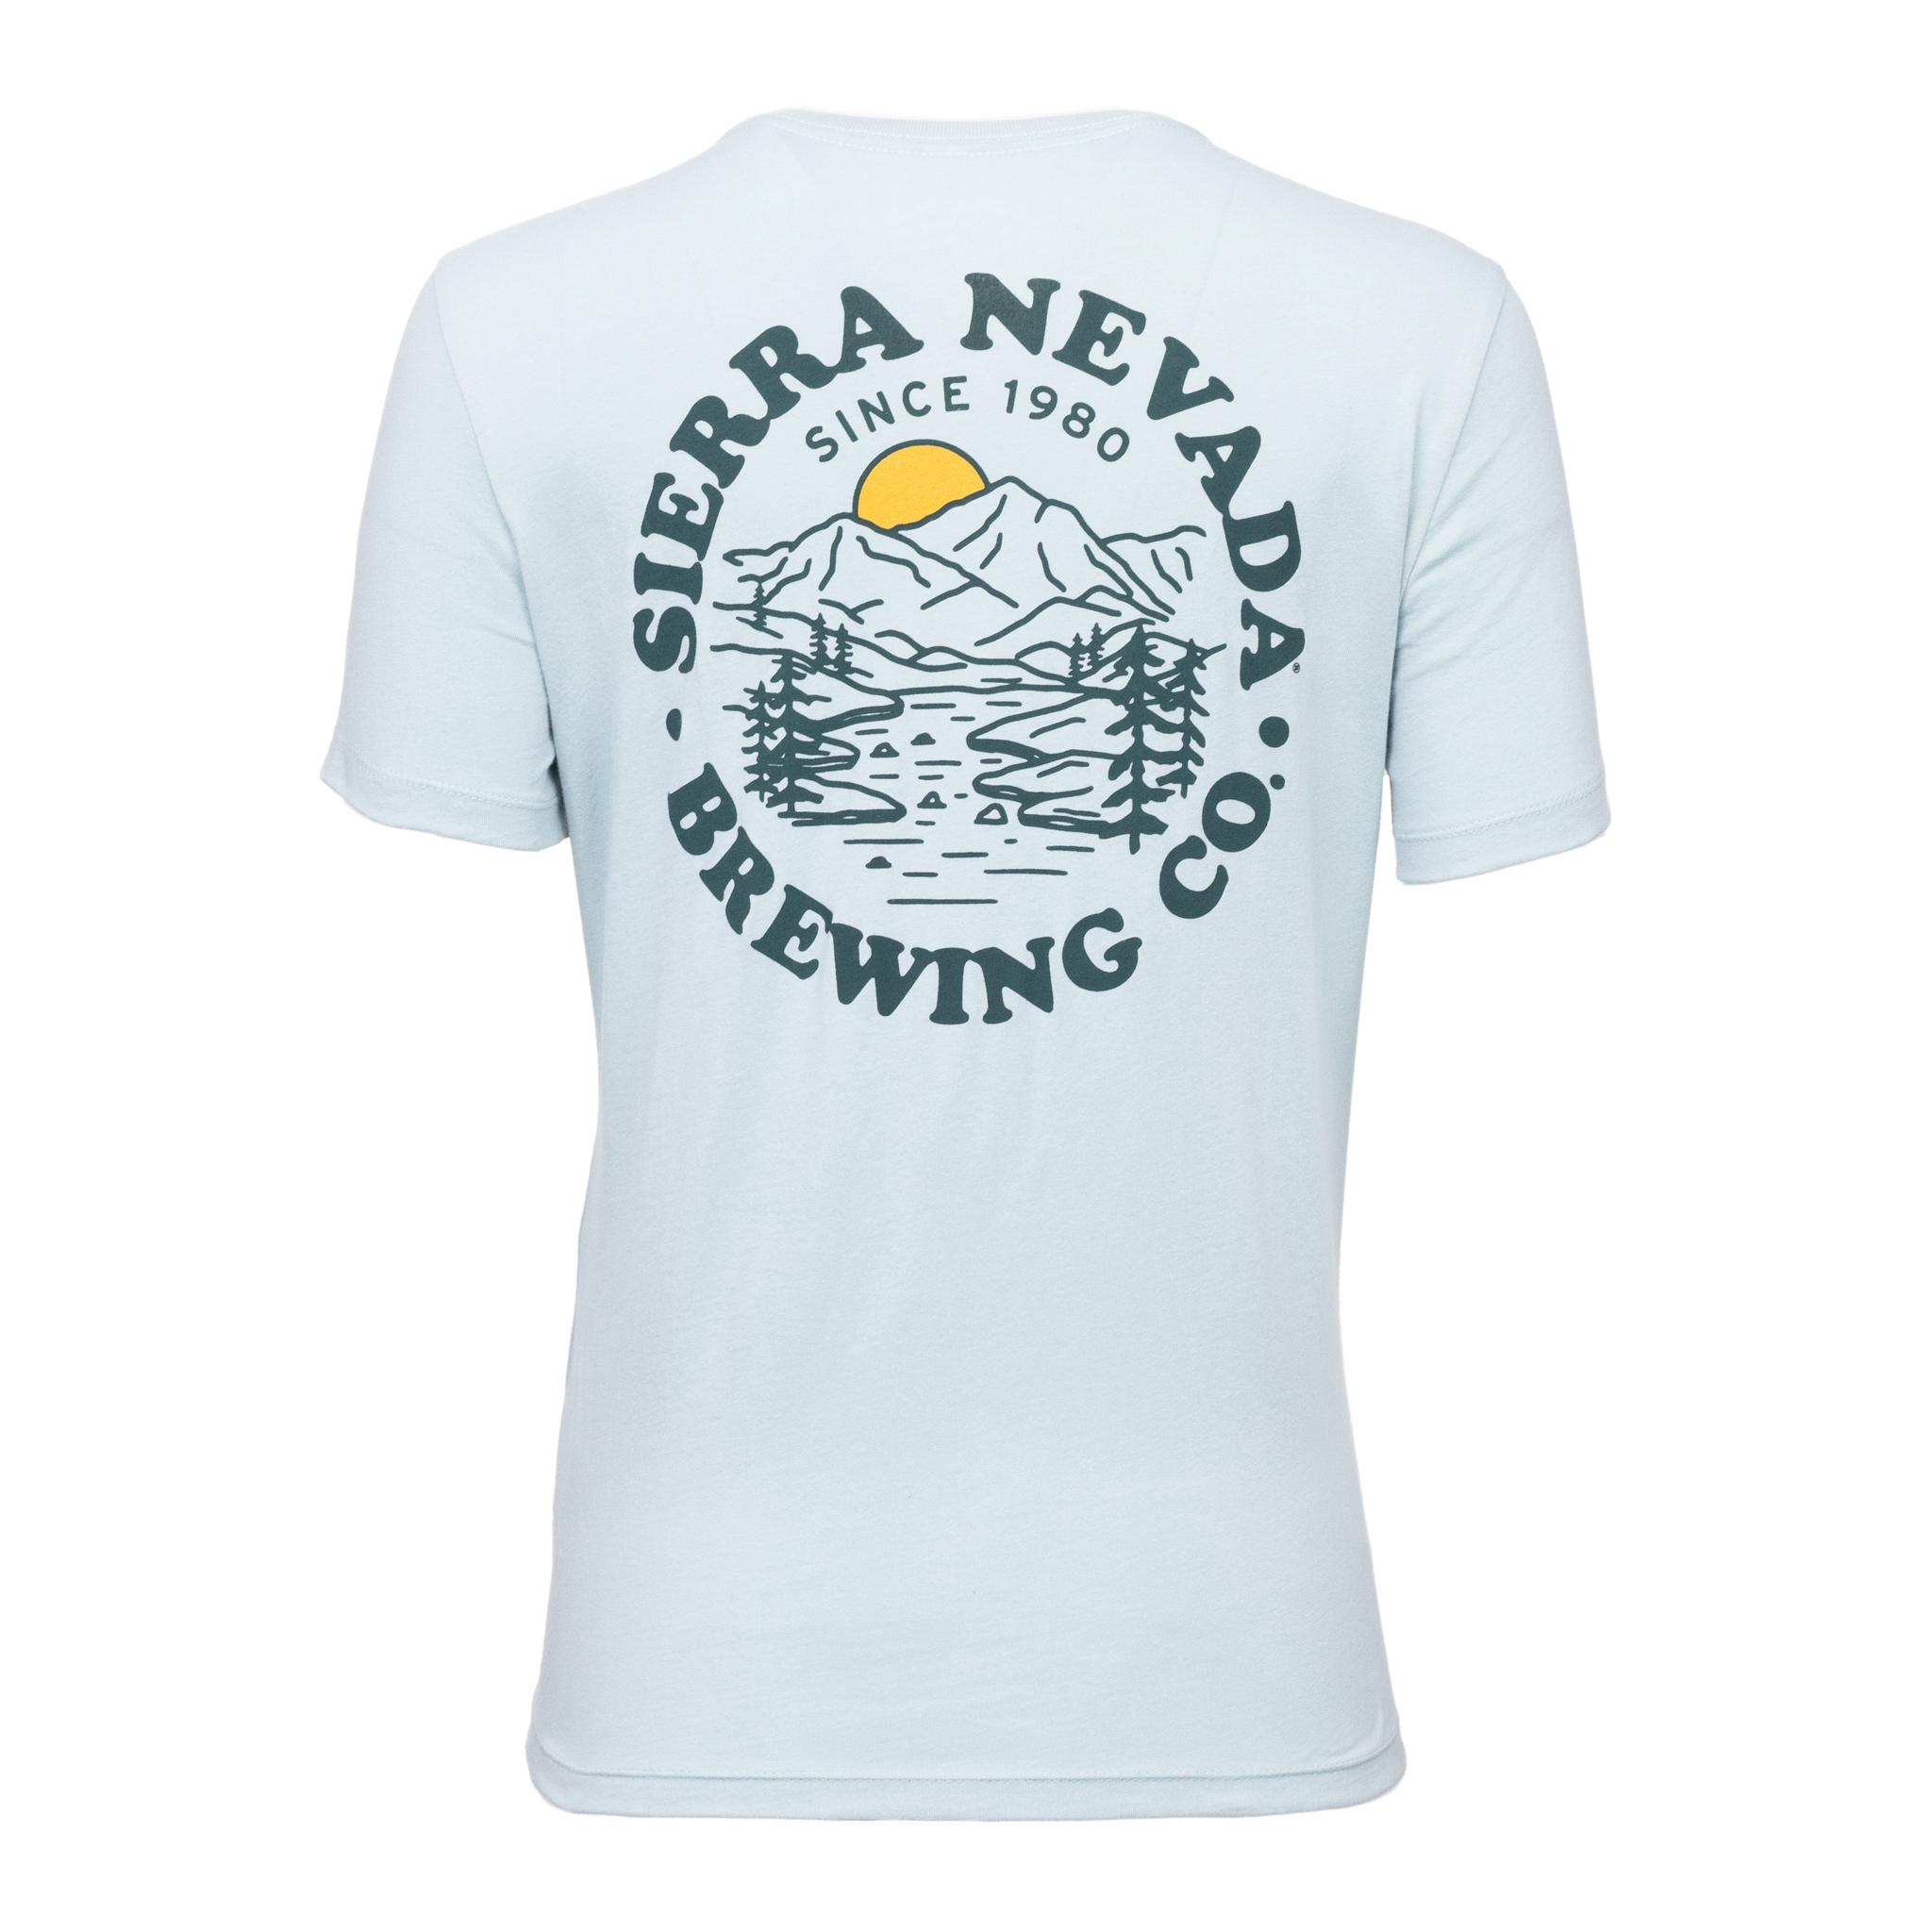 Sierra Nevada Brewing Co. Women's Circle Mountain Tee - back view featuring mountain graphic